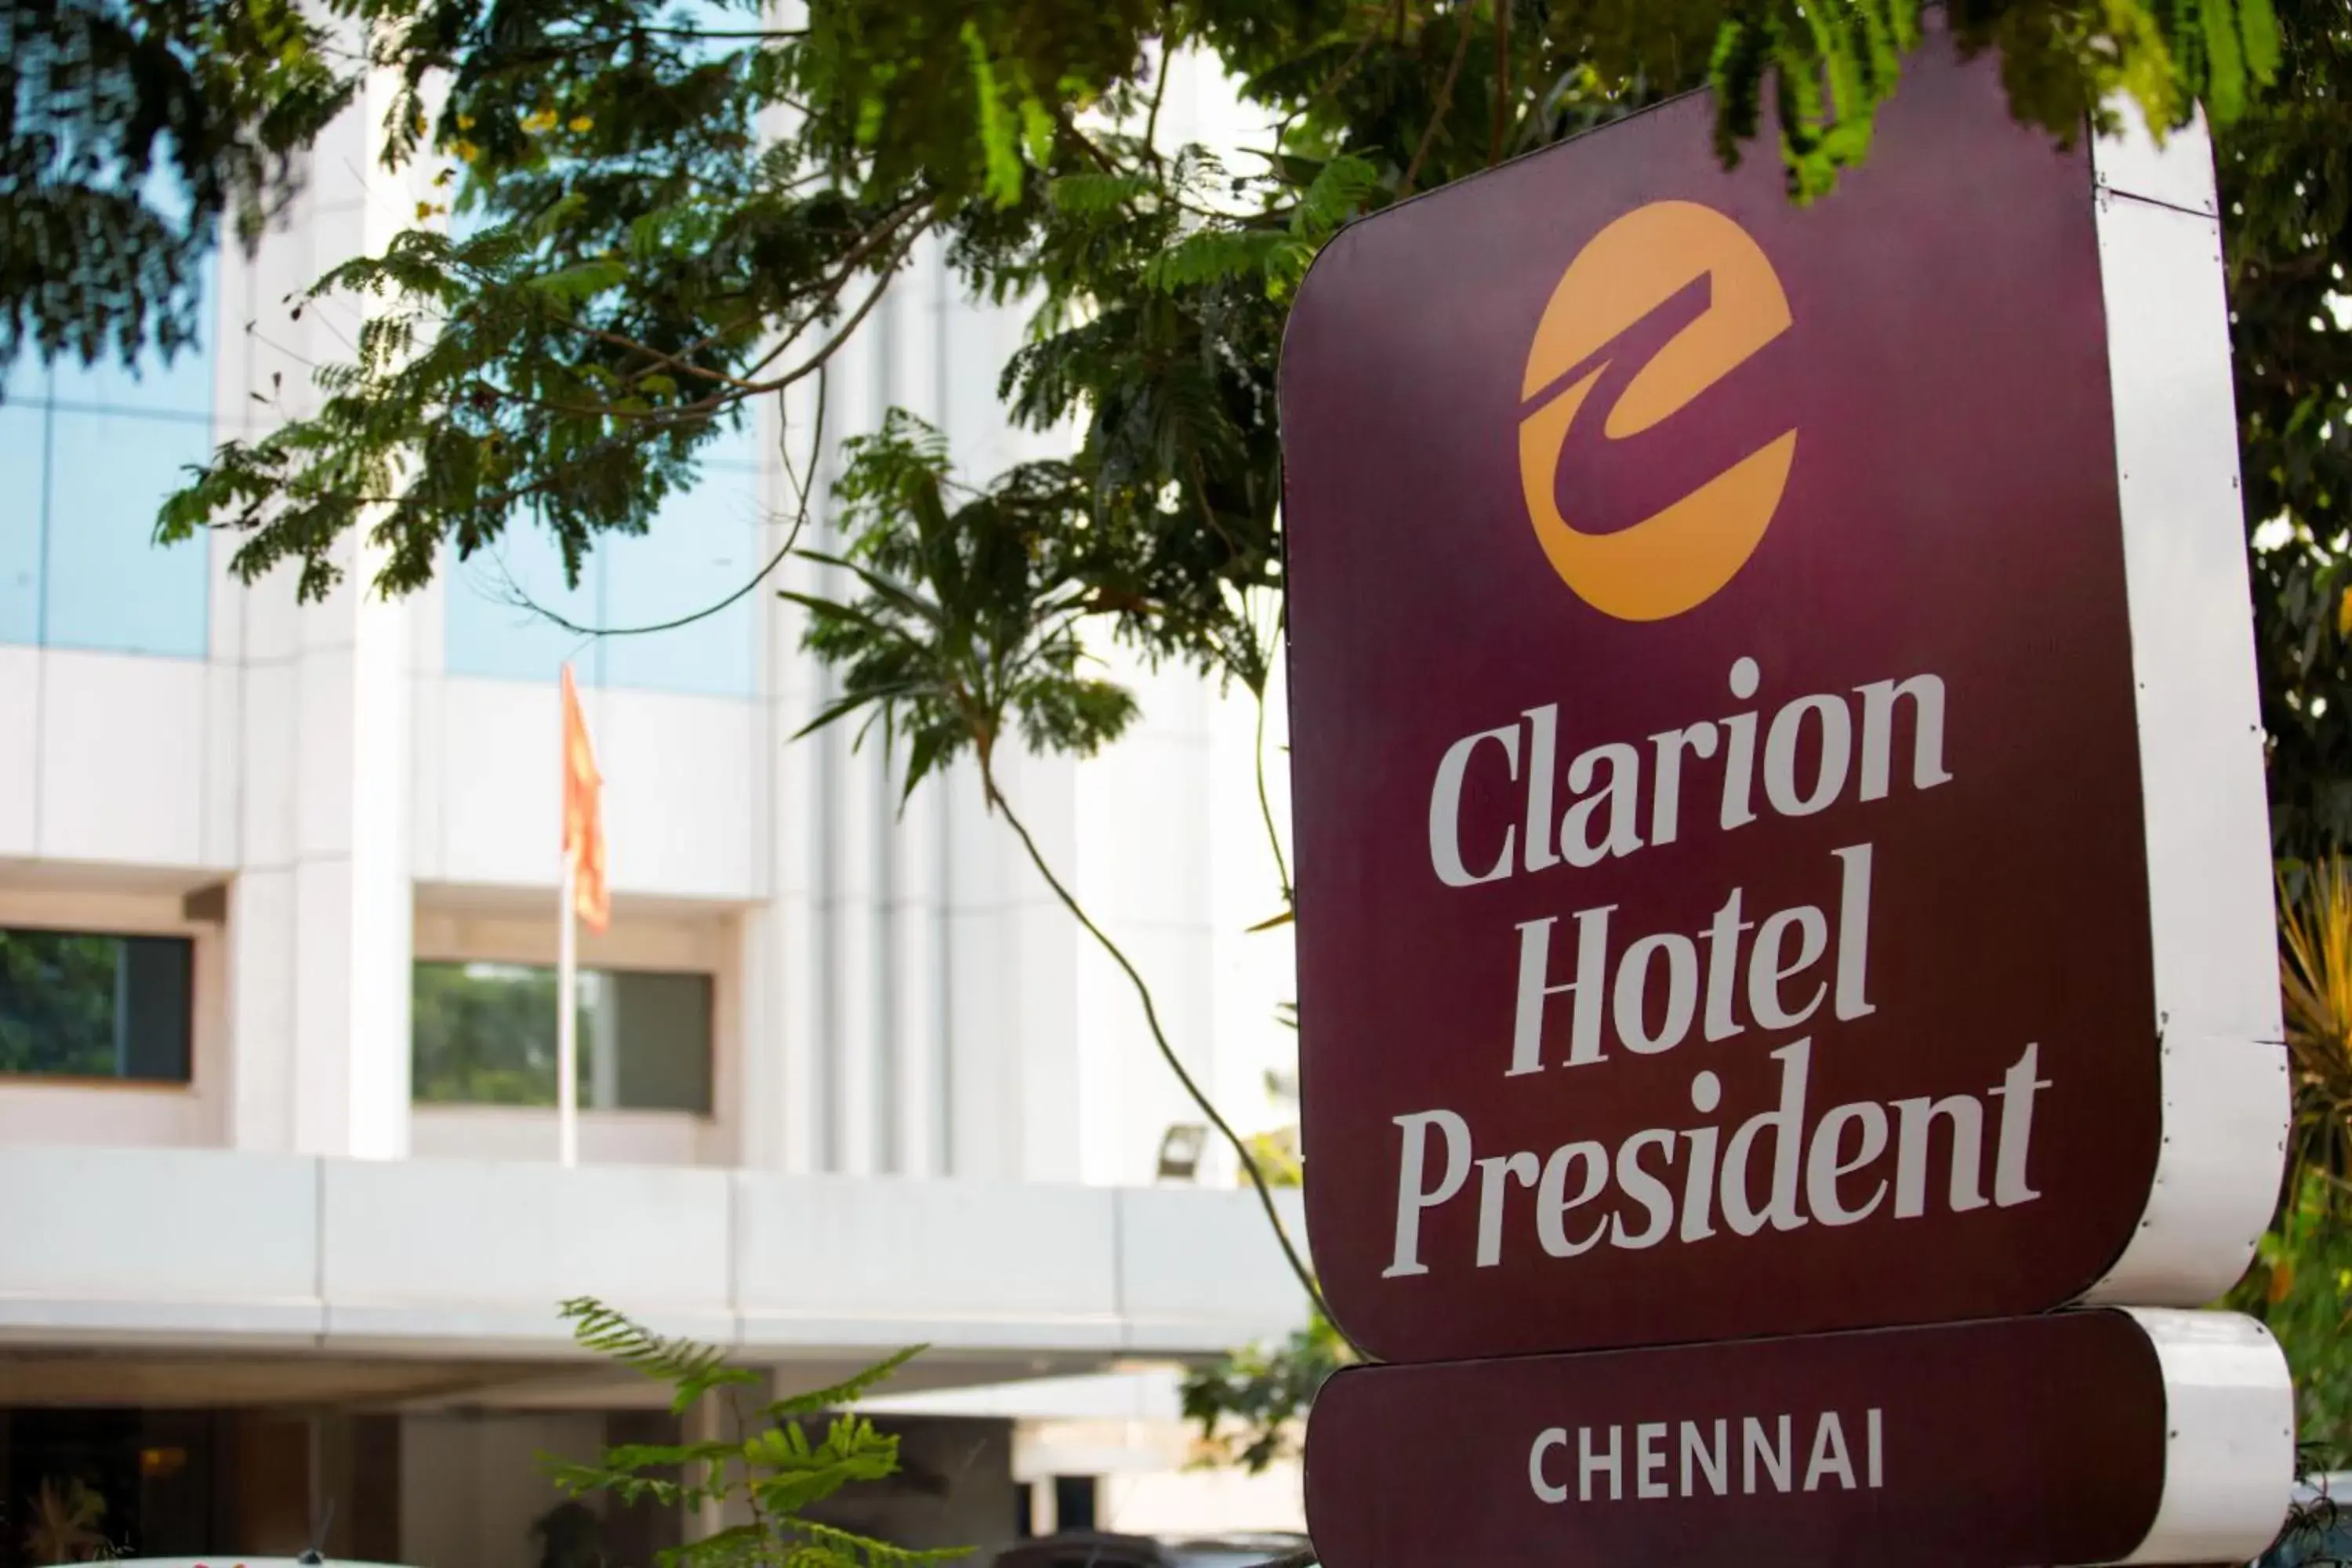 Property logo or sign, Property Logo/Sign in Clarion Hotel President Chennai